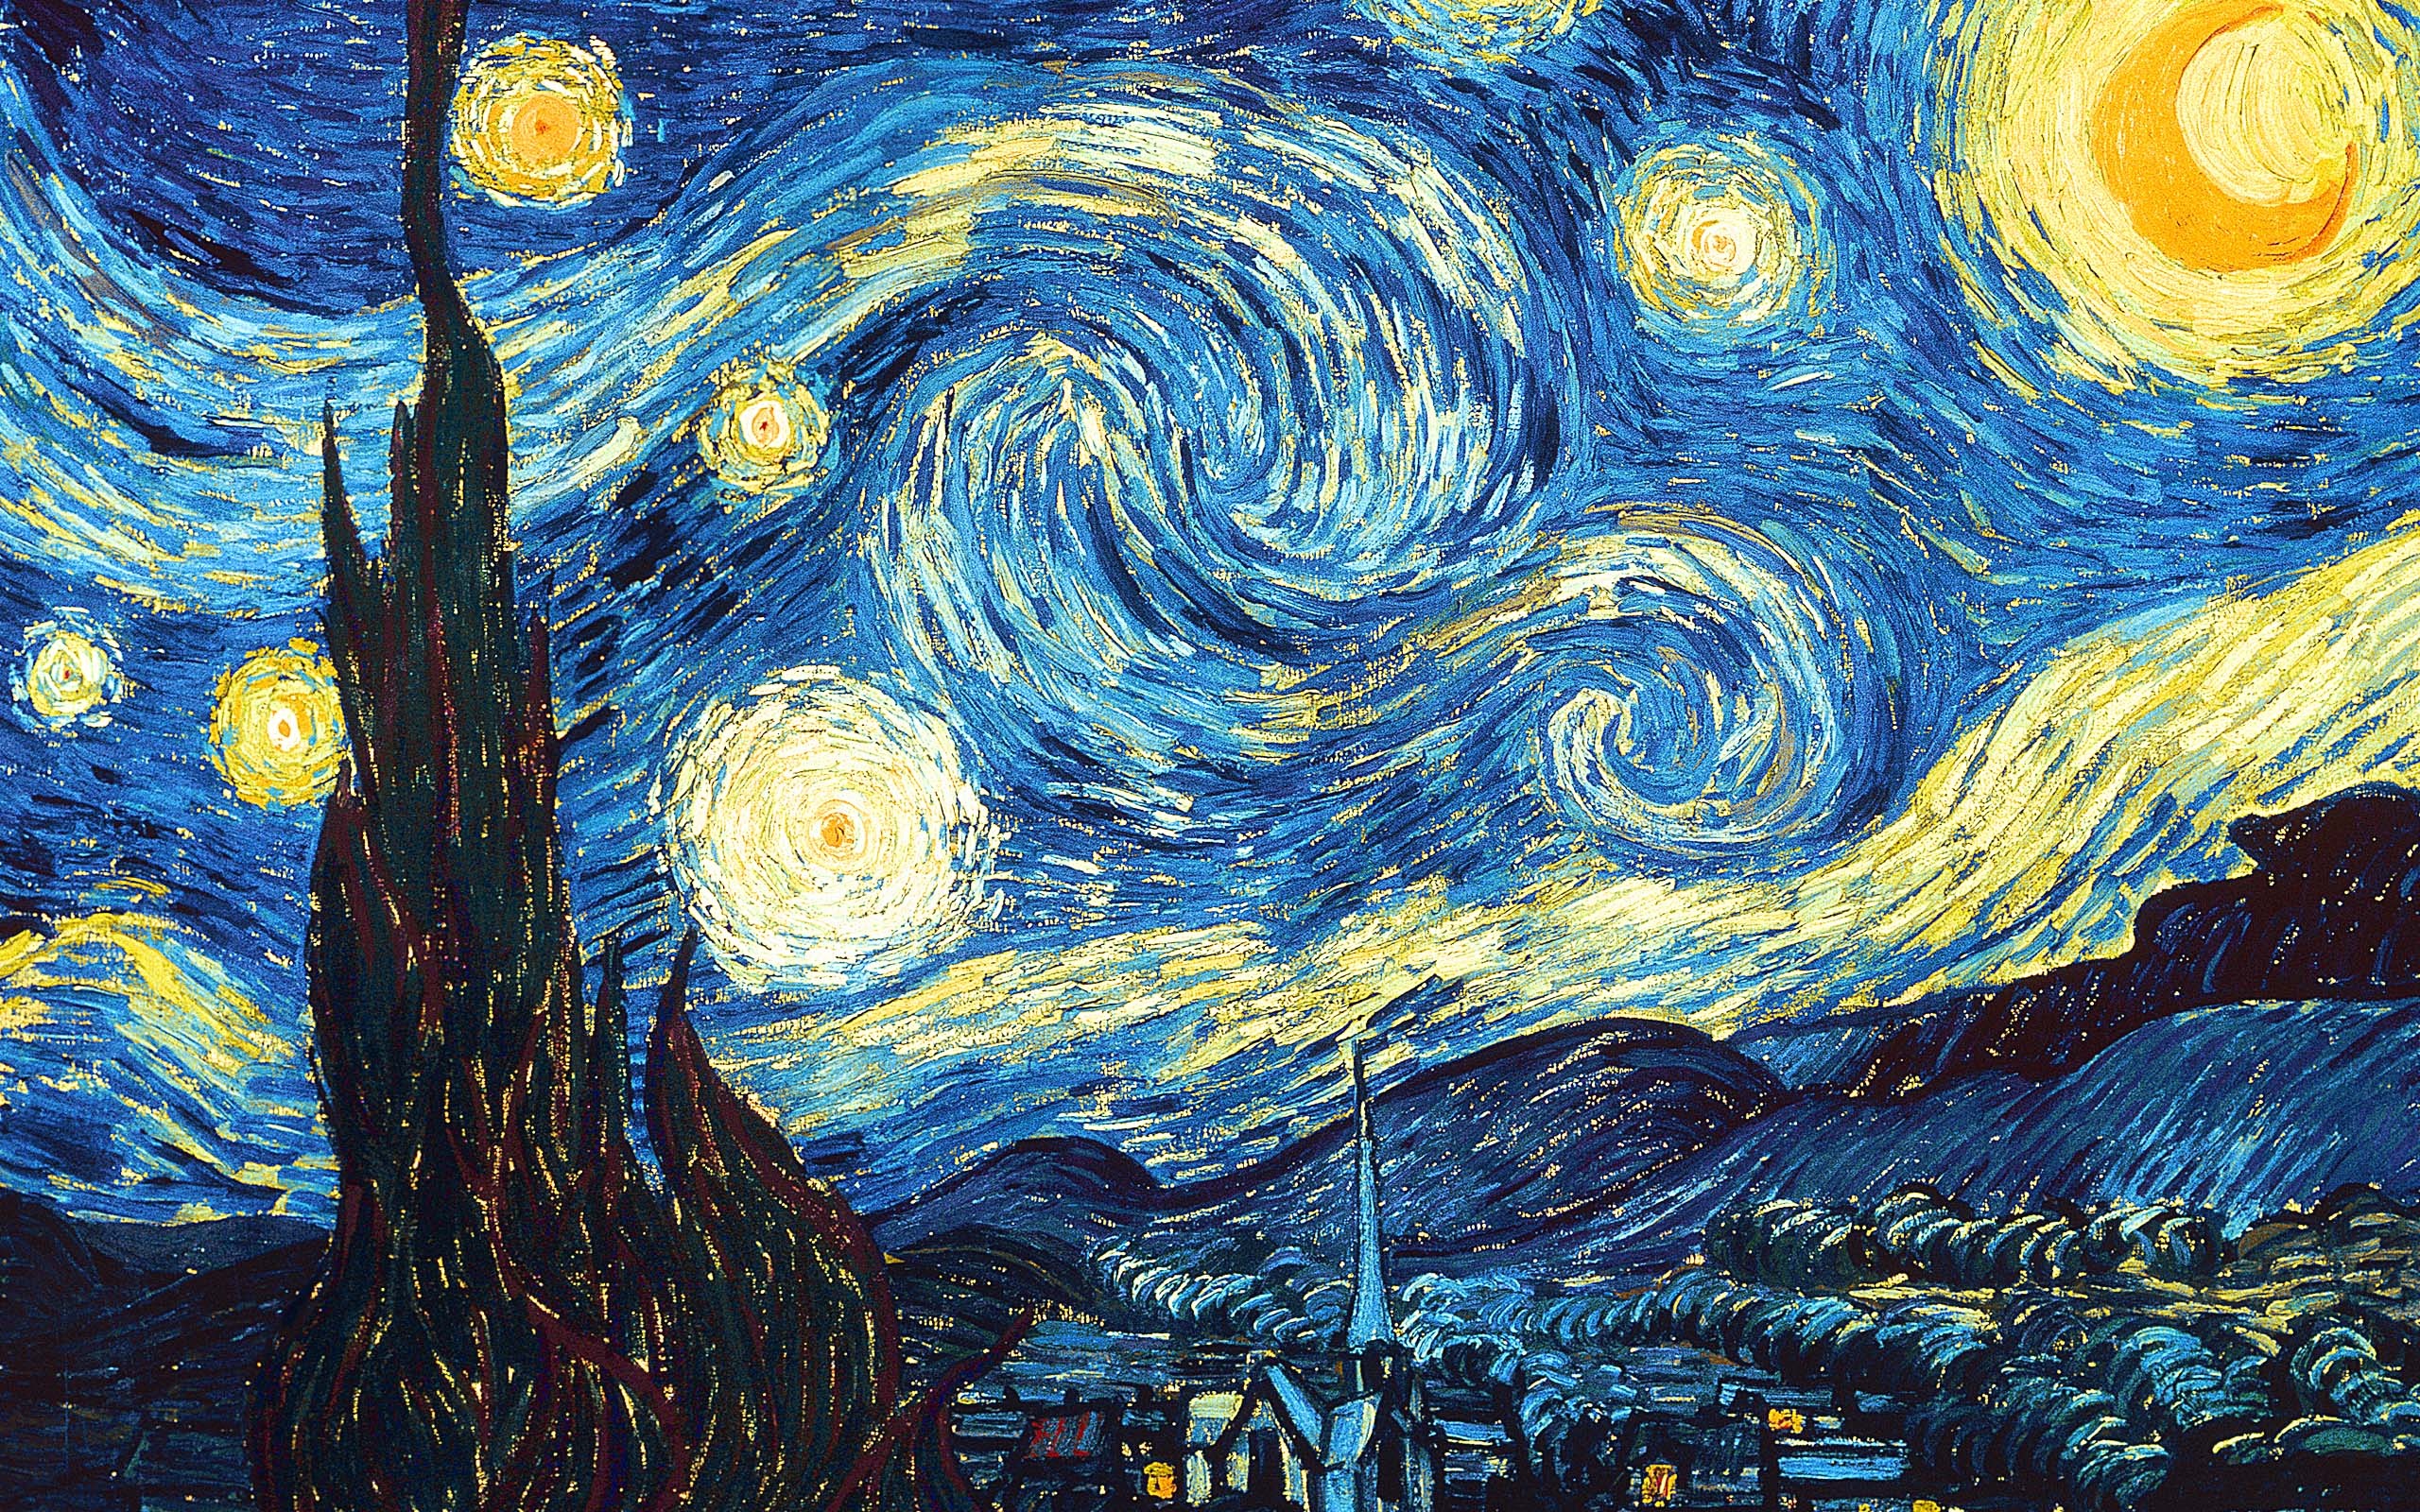 What Makes Starry Night From Van Gogh So Special?